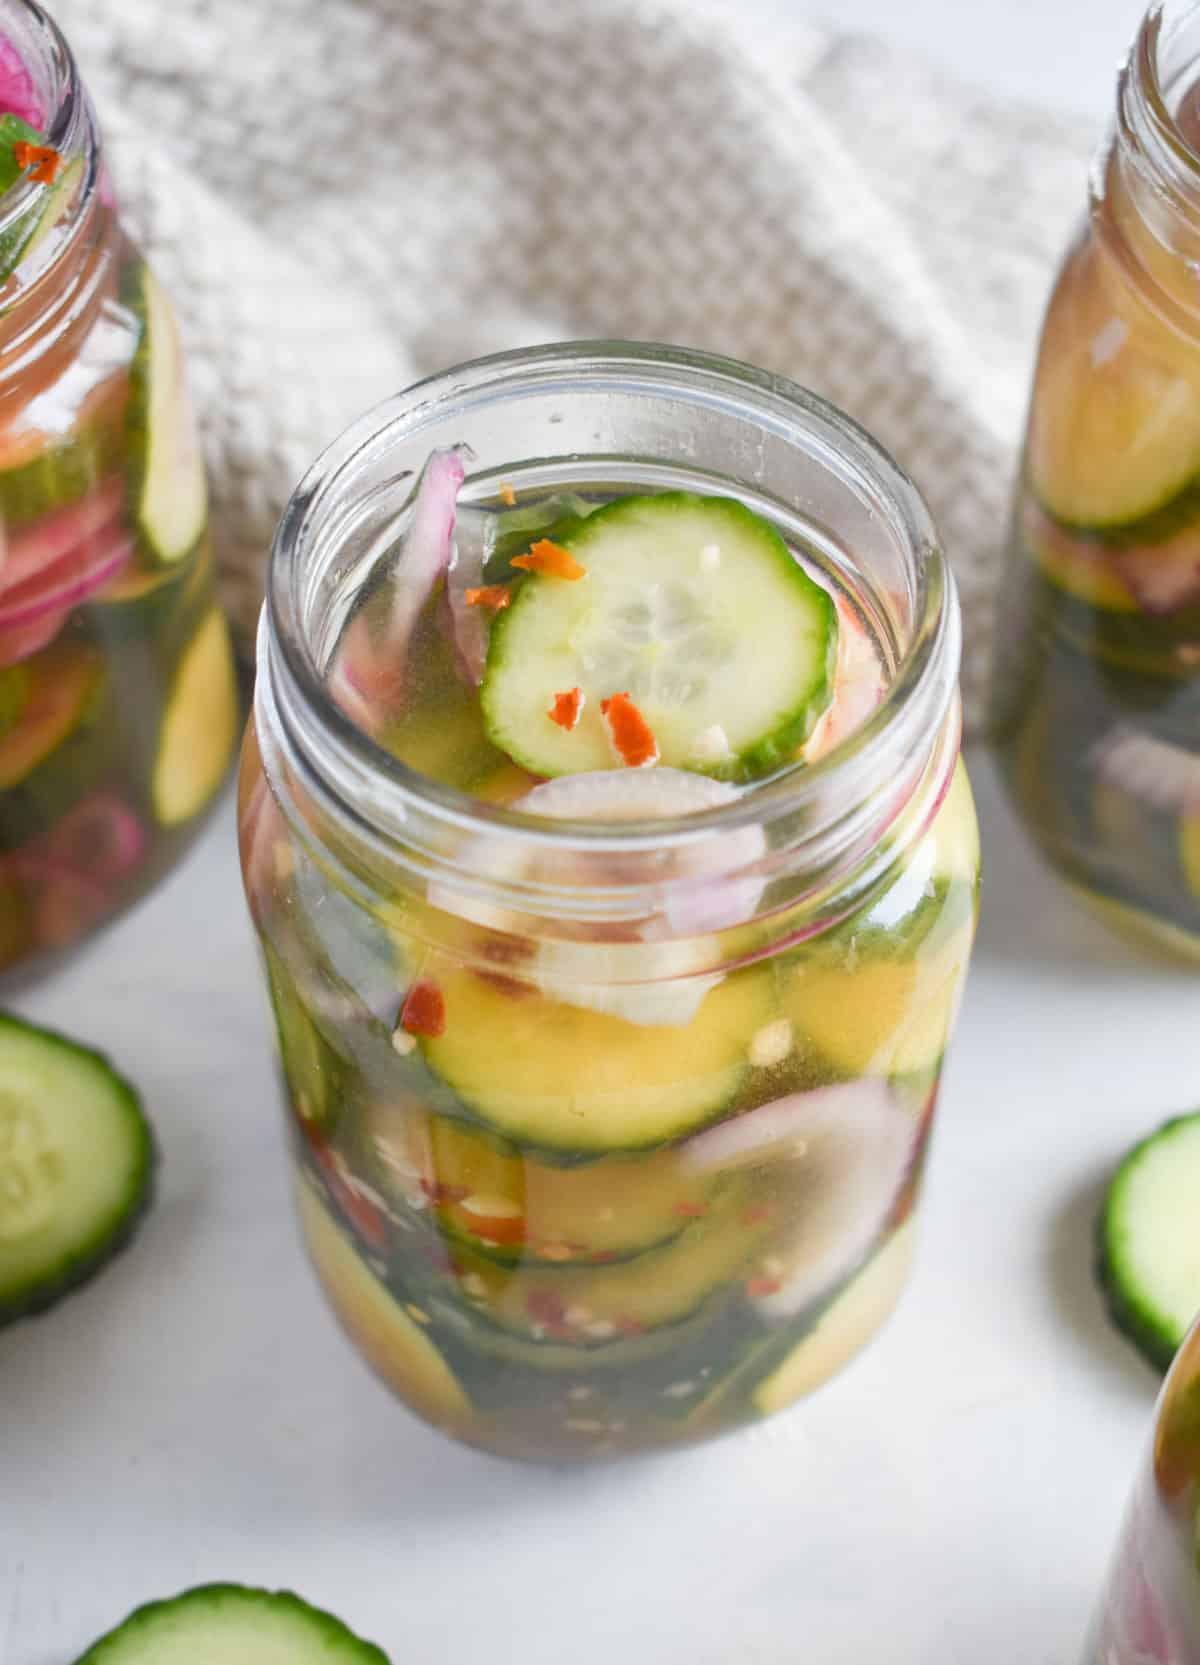 several jars full of pickles with lids off. 